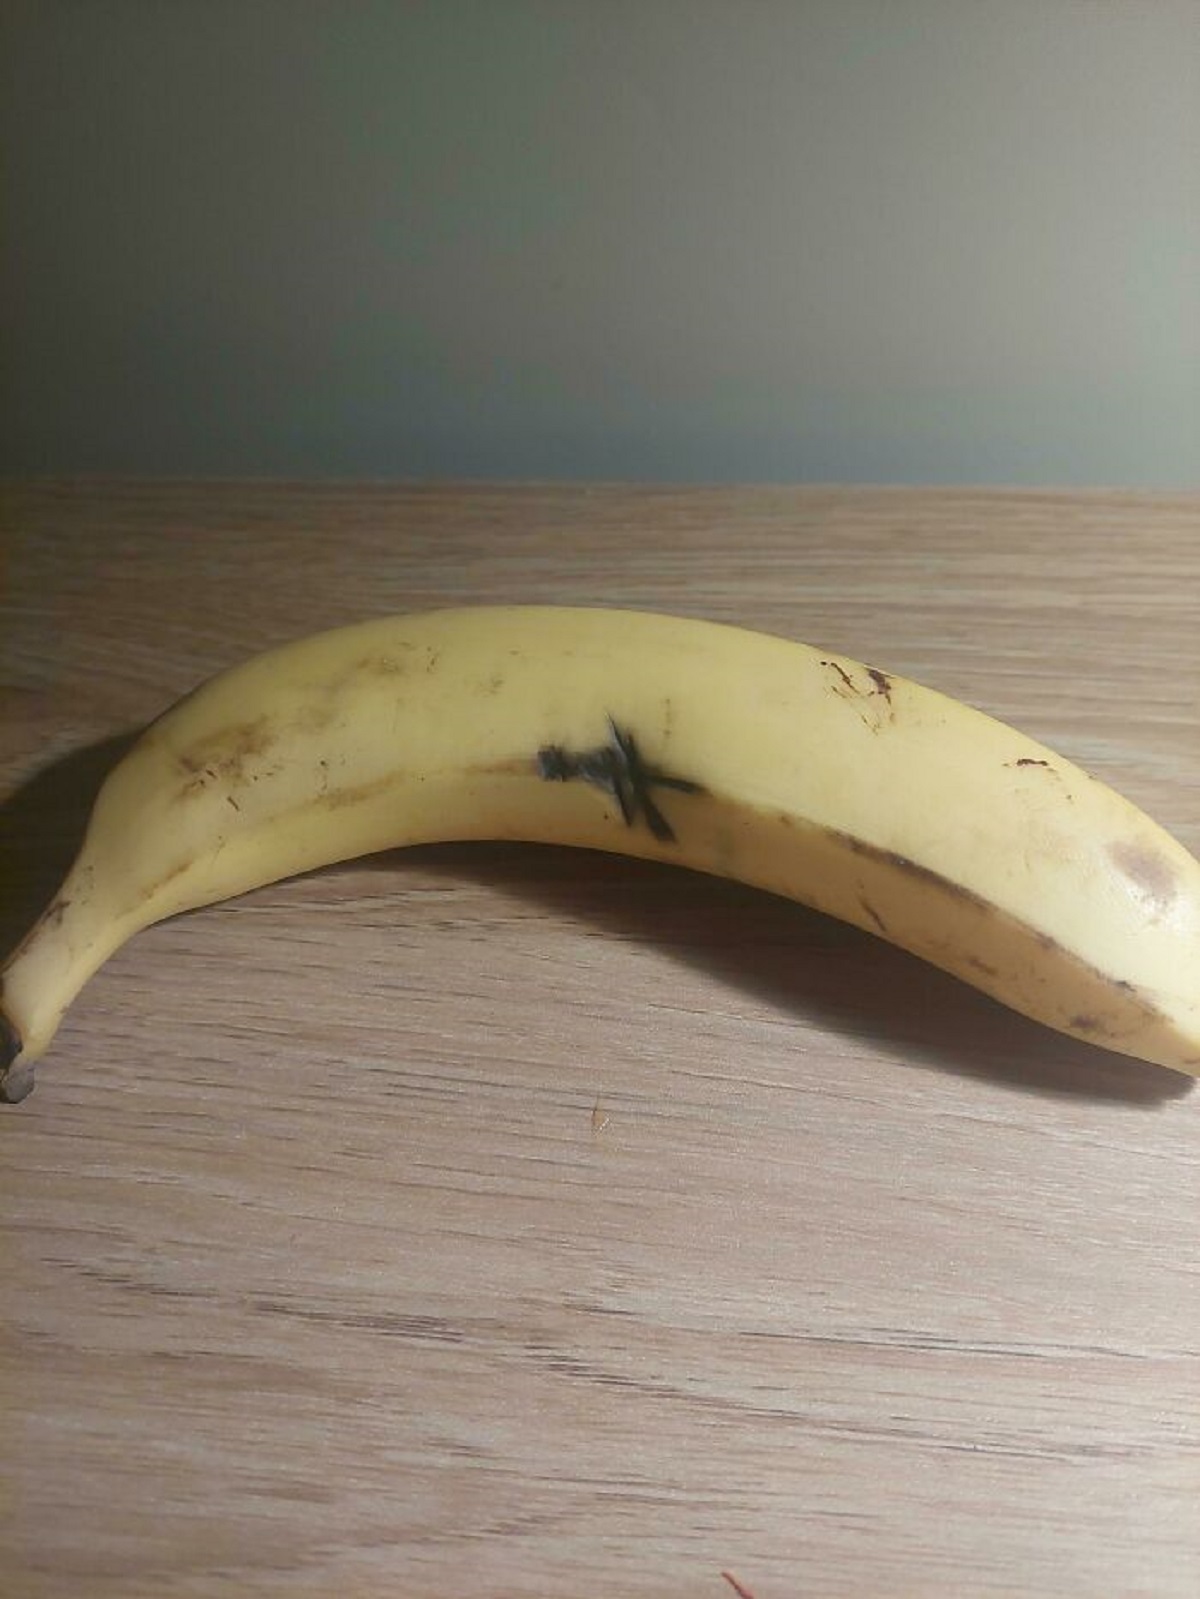 This Banana My Boss Gave Me To Celebrate 1 Year Of Work